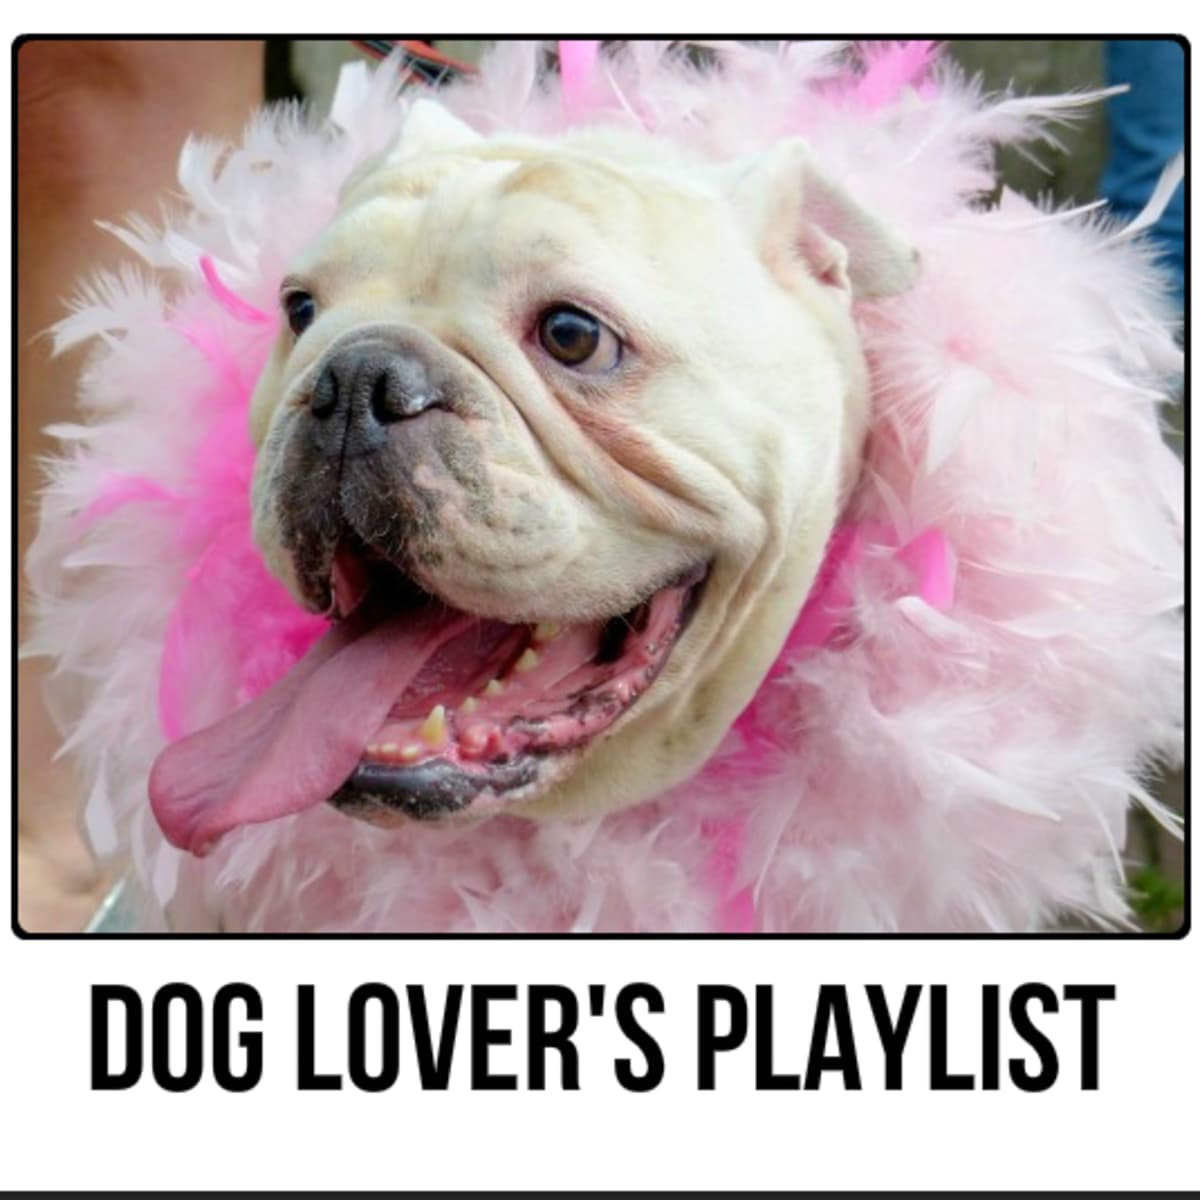 Dog Lover's Playlist: 48 Songs for People Who Love Dogs - Spinditty